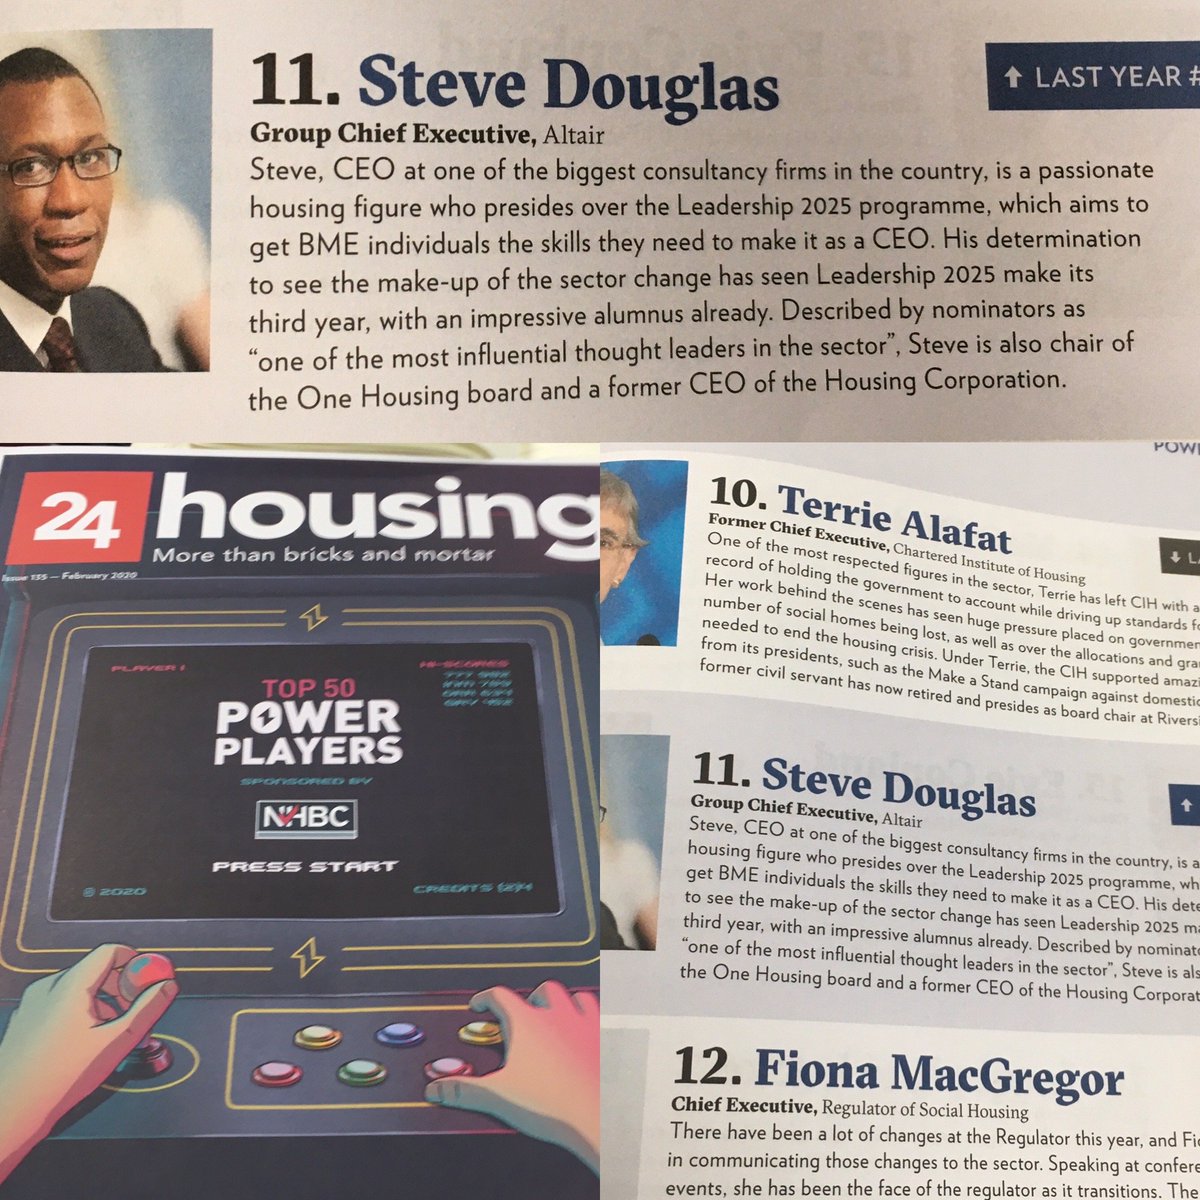 Delighted to see our group CEO Steve Douglas CBE in @24housing's Top 50 Power Players. Unusual to see a consultancy lead so high up and denotes our services and leadership in the sector, across change, diversity and inclusion too. #PowerPlayers @AltairLtd @Leadership2025